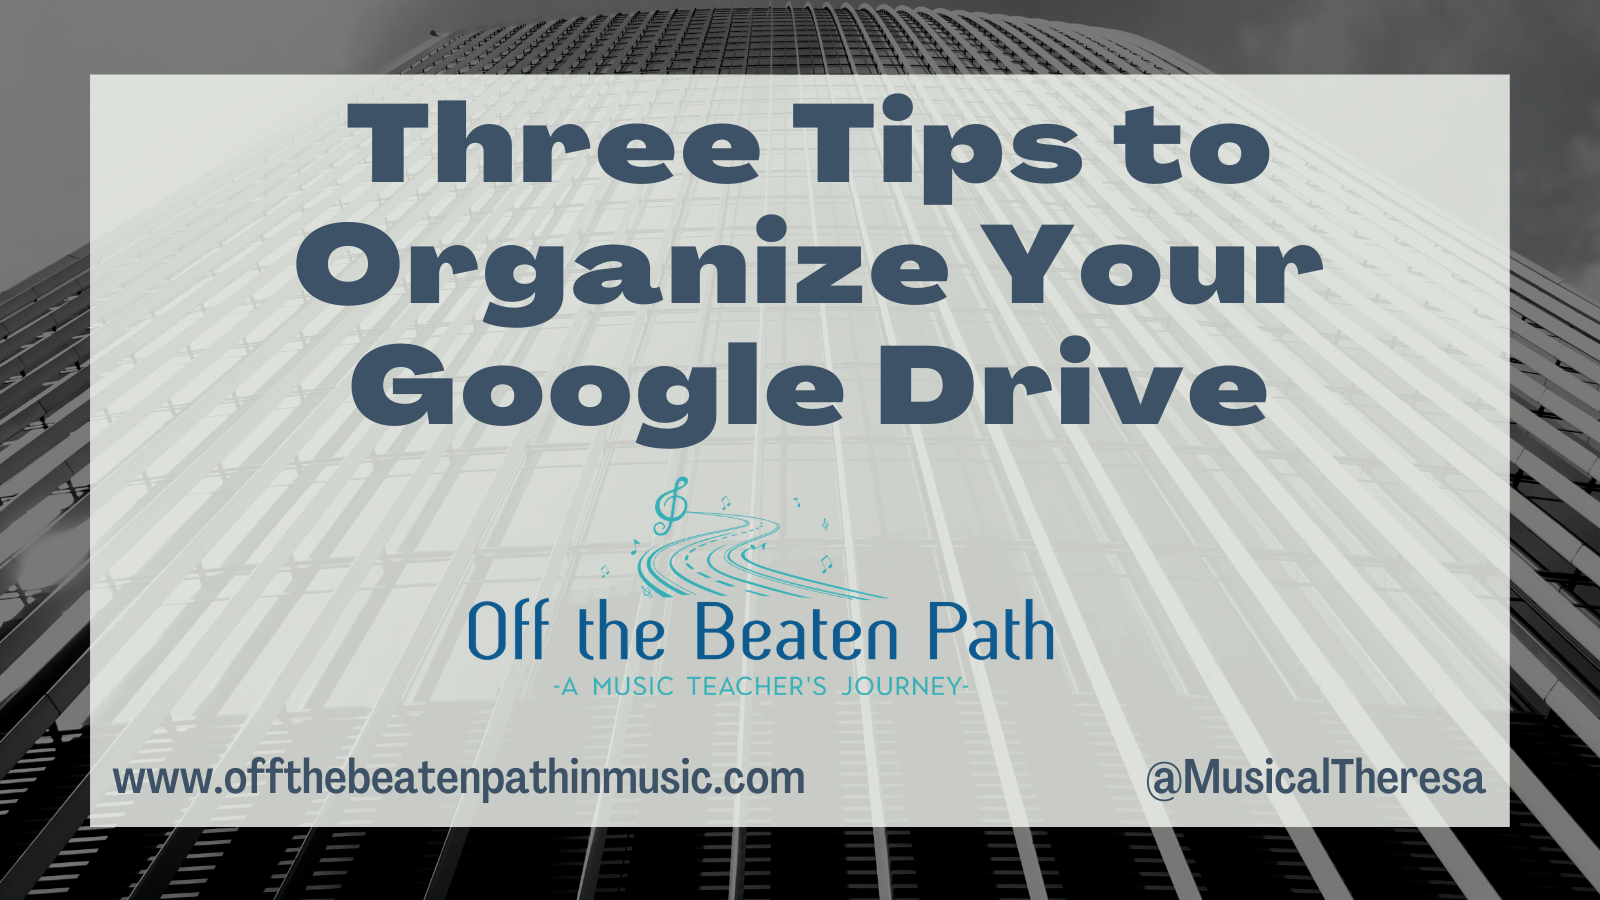 Three Tips for Organizing Your Google Drive, from Off the Beaten Path in Music